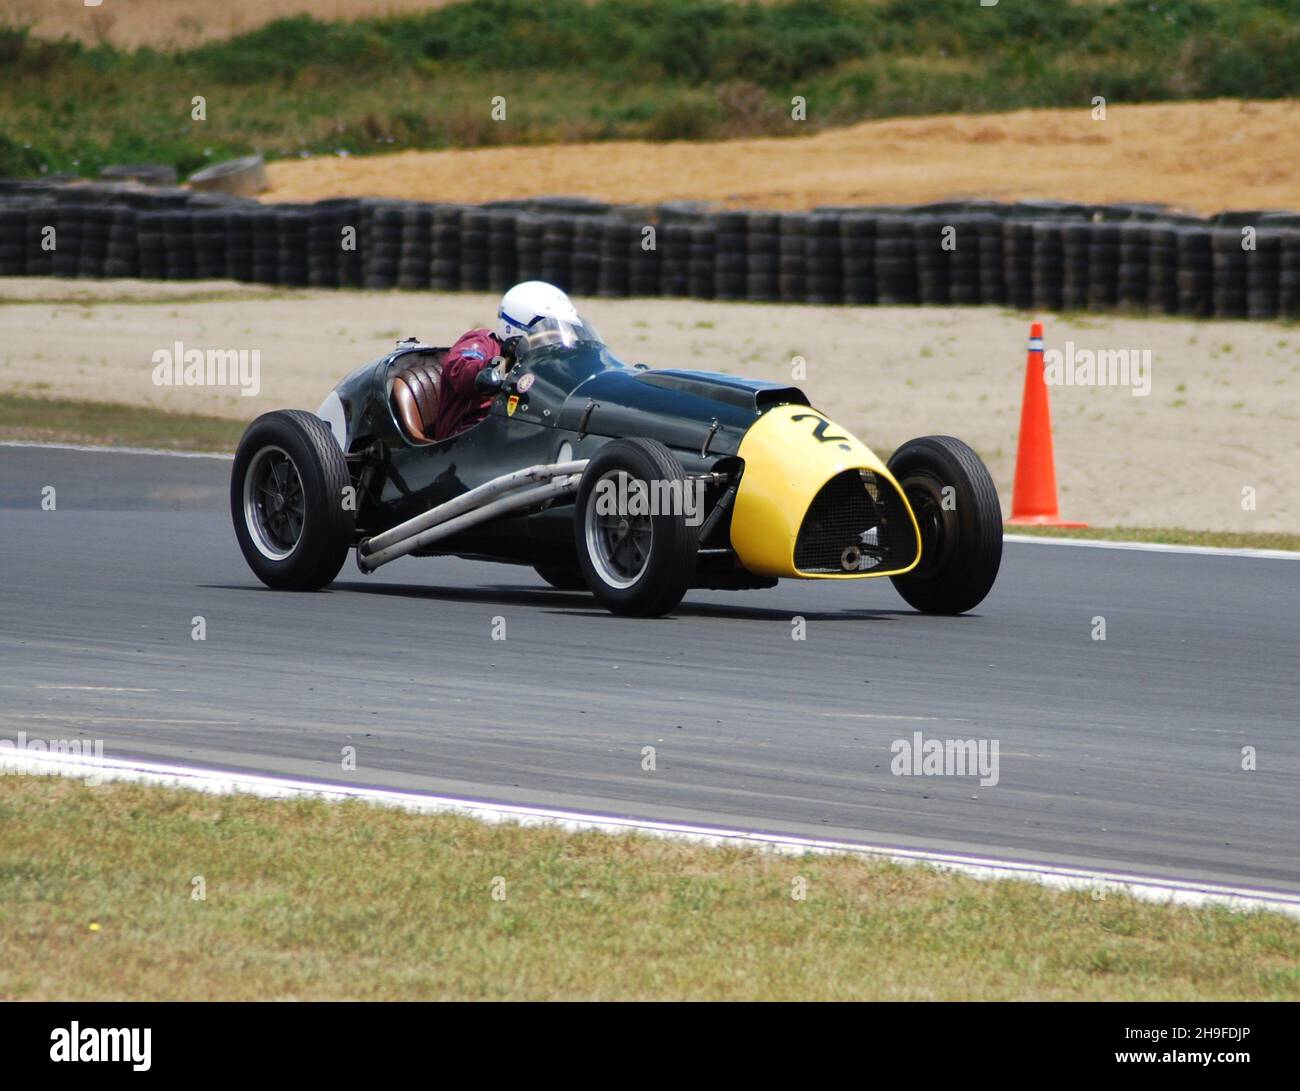 #2 David White from the UK, driving a 1953 Mk2 Cooper Bristol at the official opening of the Hampton Downs circuit. The New Zealand Festival of Motor Racing, attracted a large contingent of drivers and cars from overseas. This January 2010 Festival was to celebrate Bruce McLaren. Stock Photo